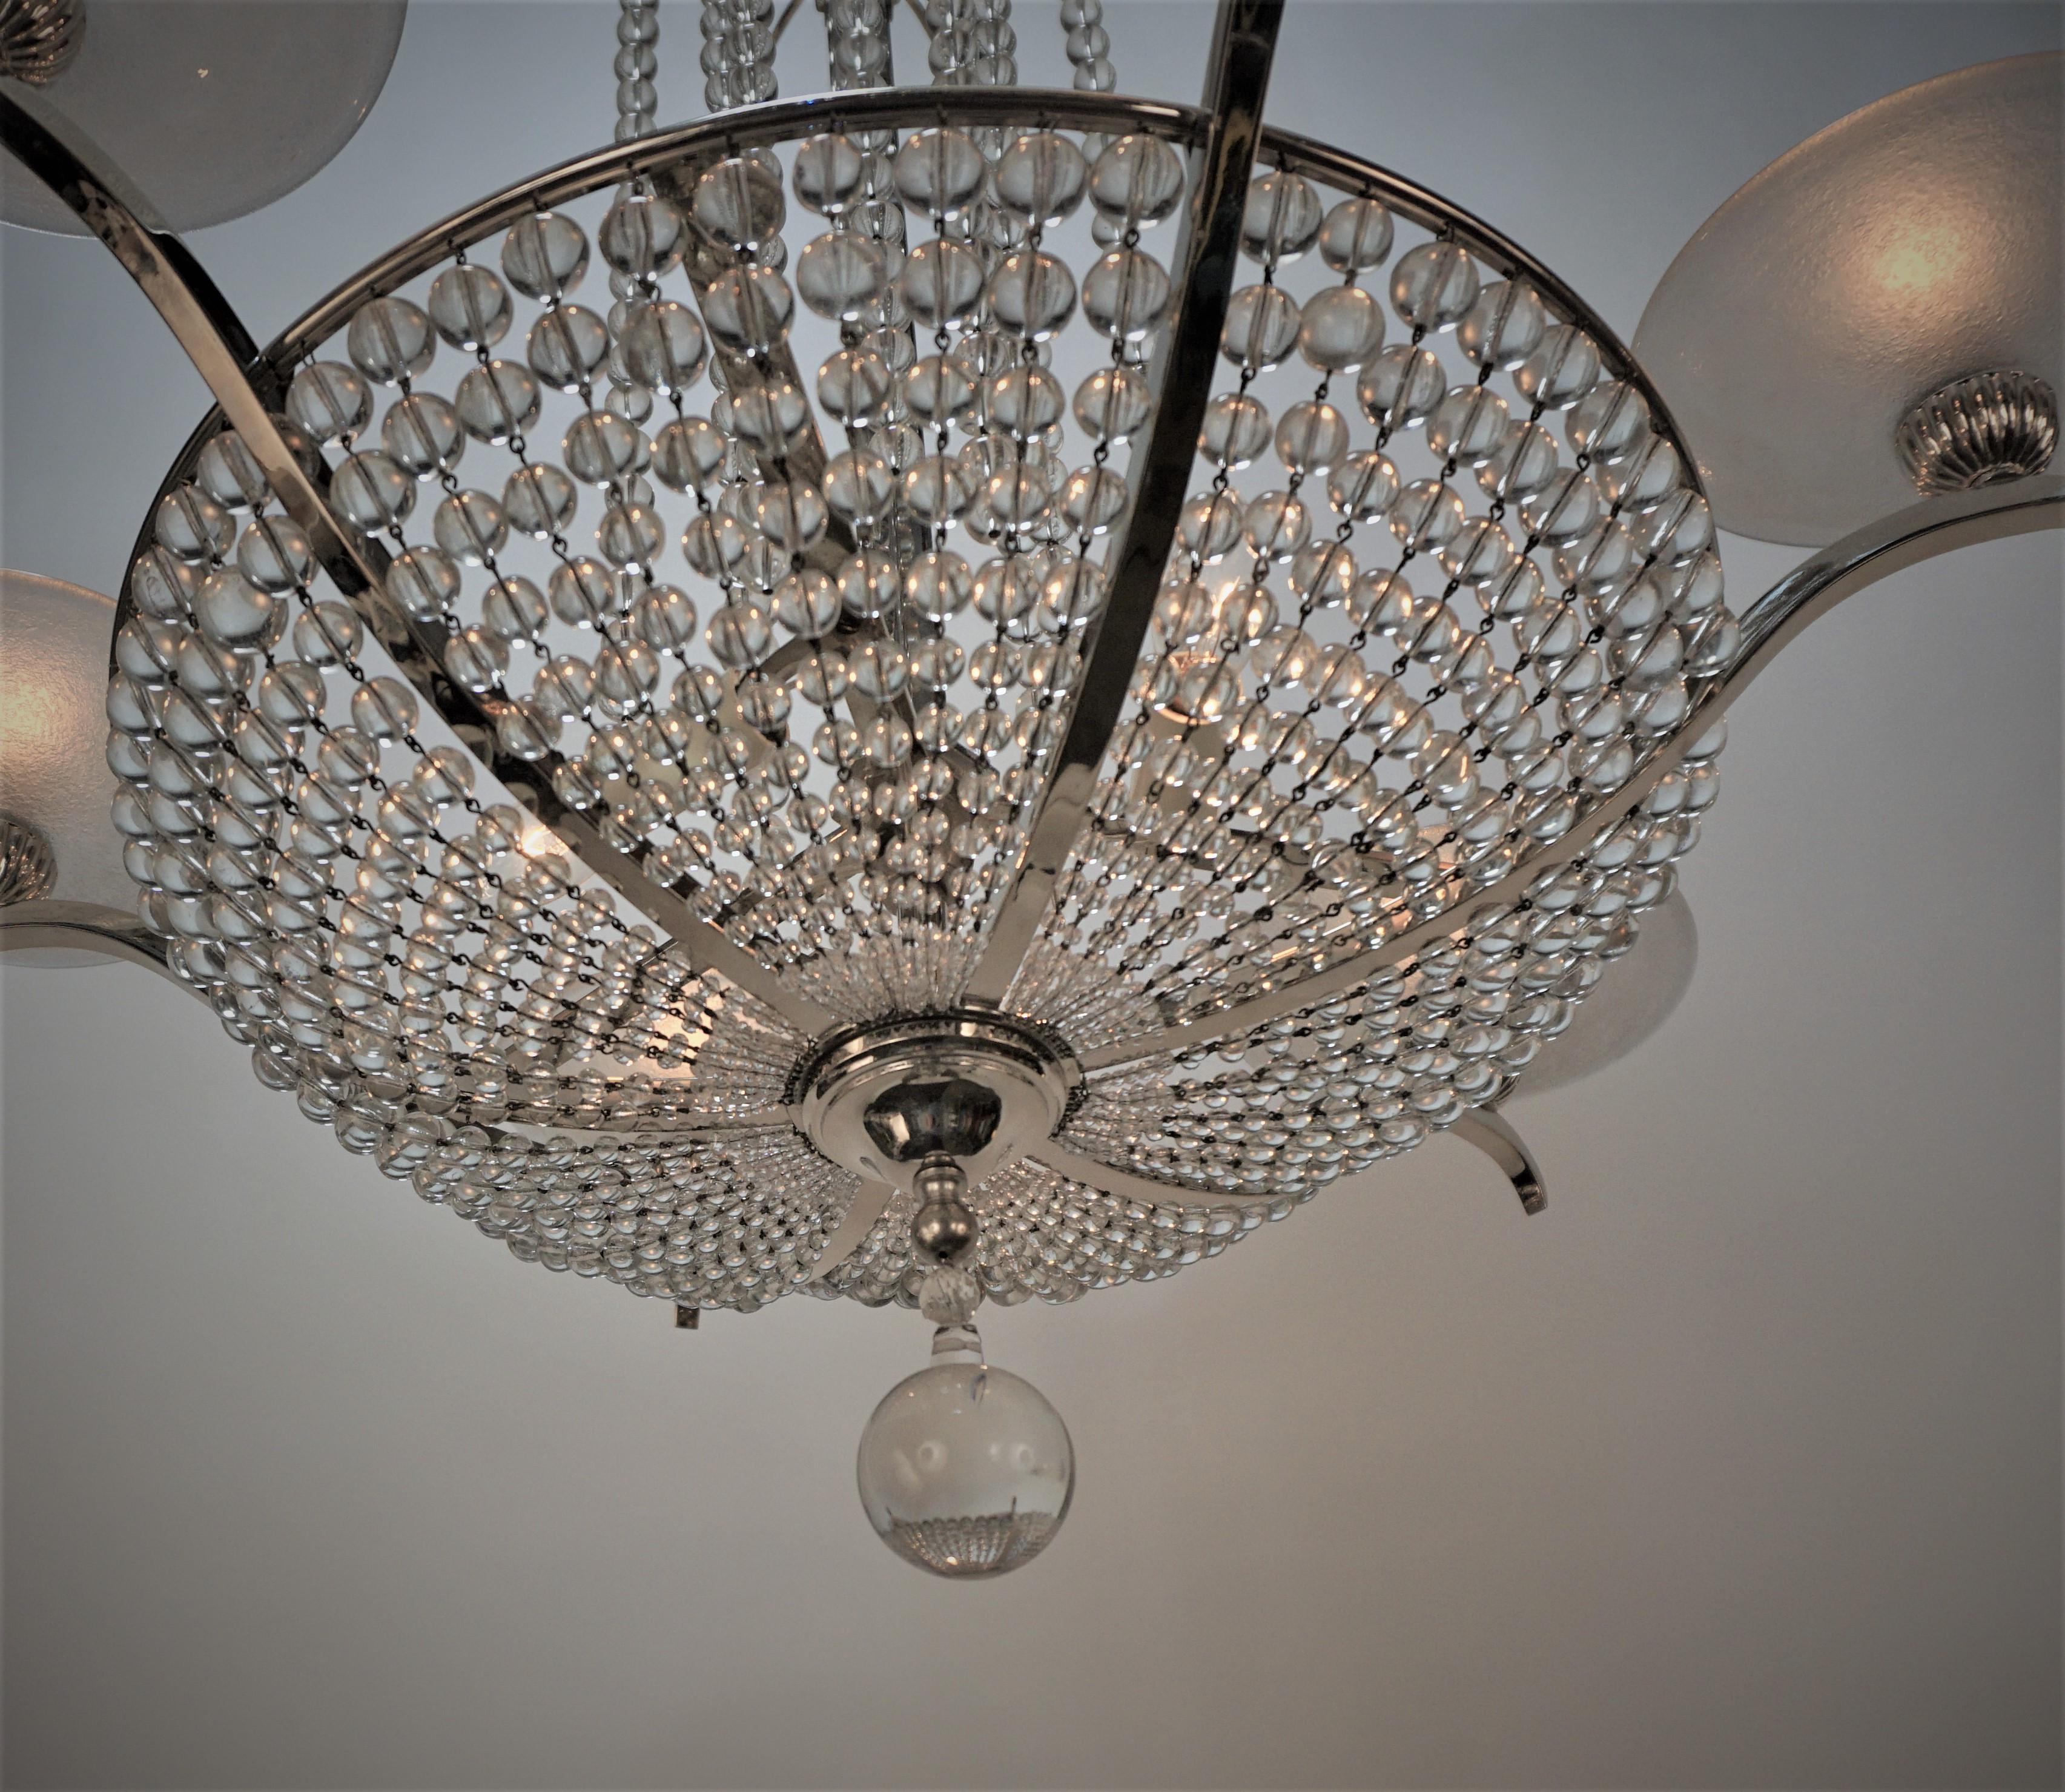 French 1930's crystal chandelier with acid texture glass shades and nickel on bronze frame.